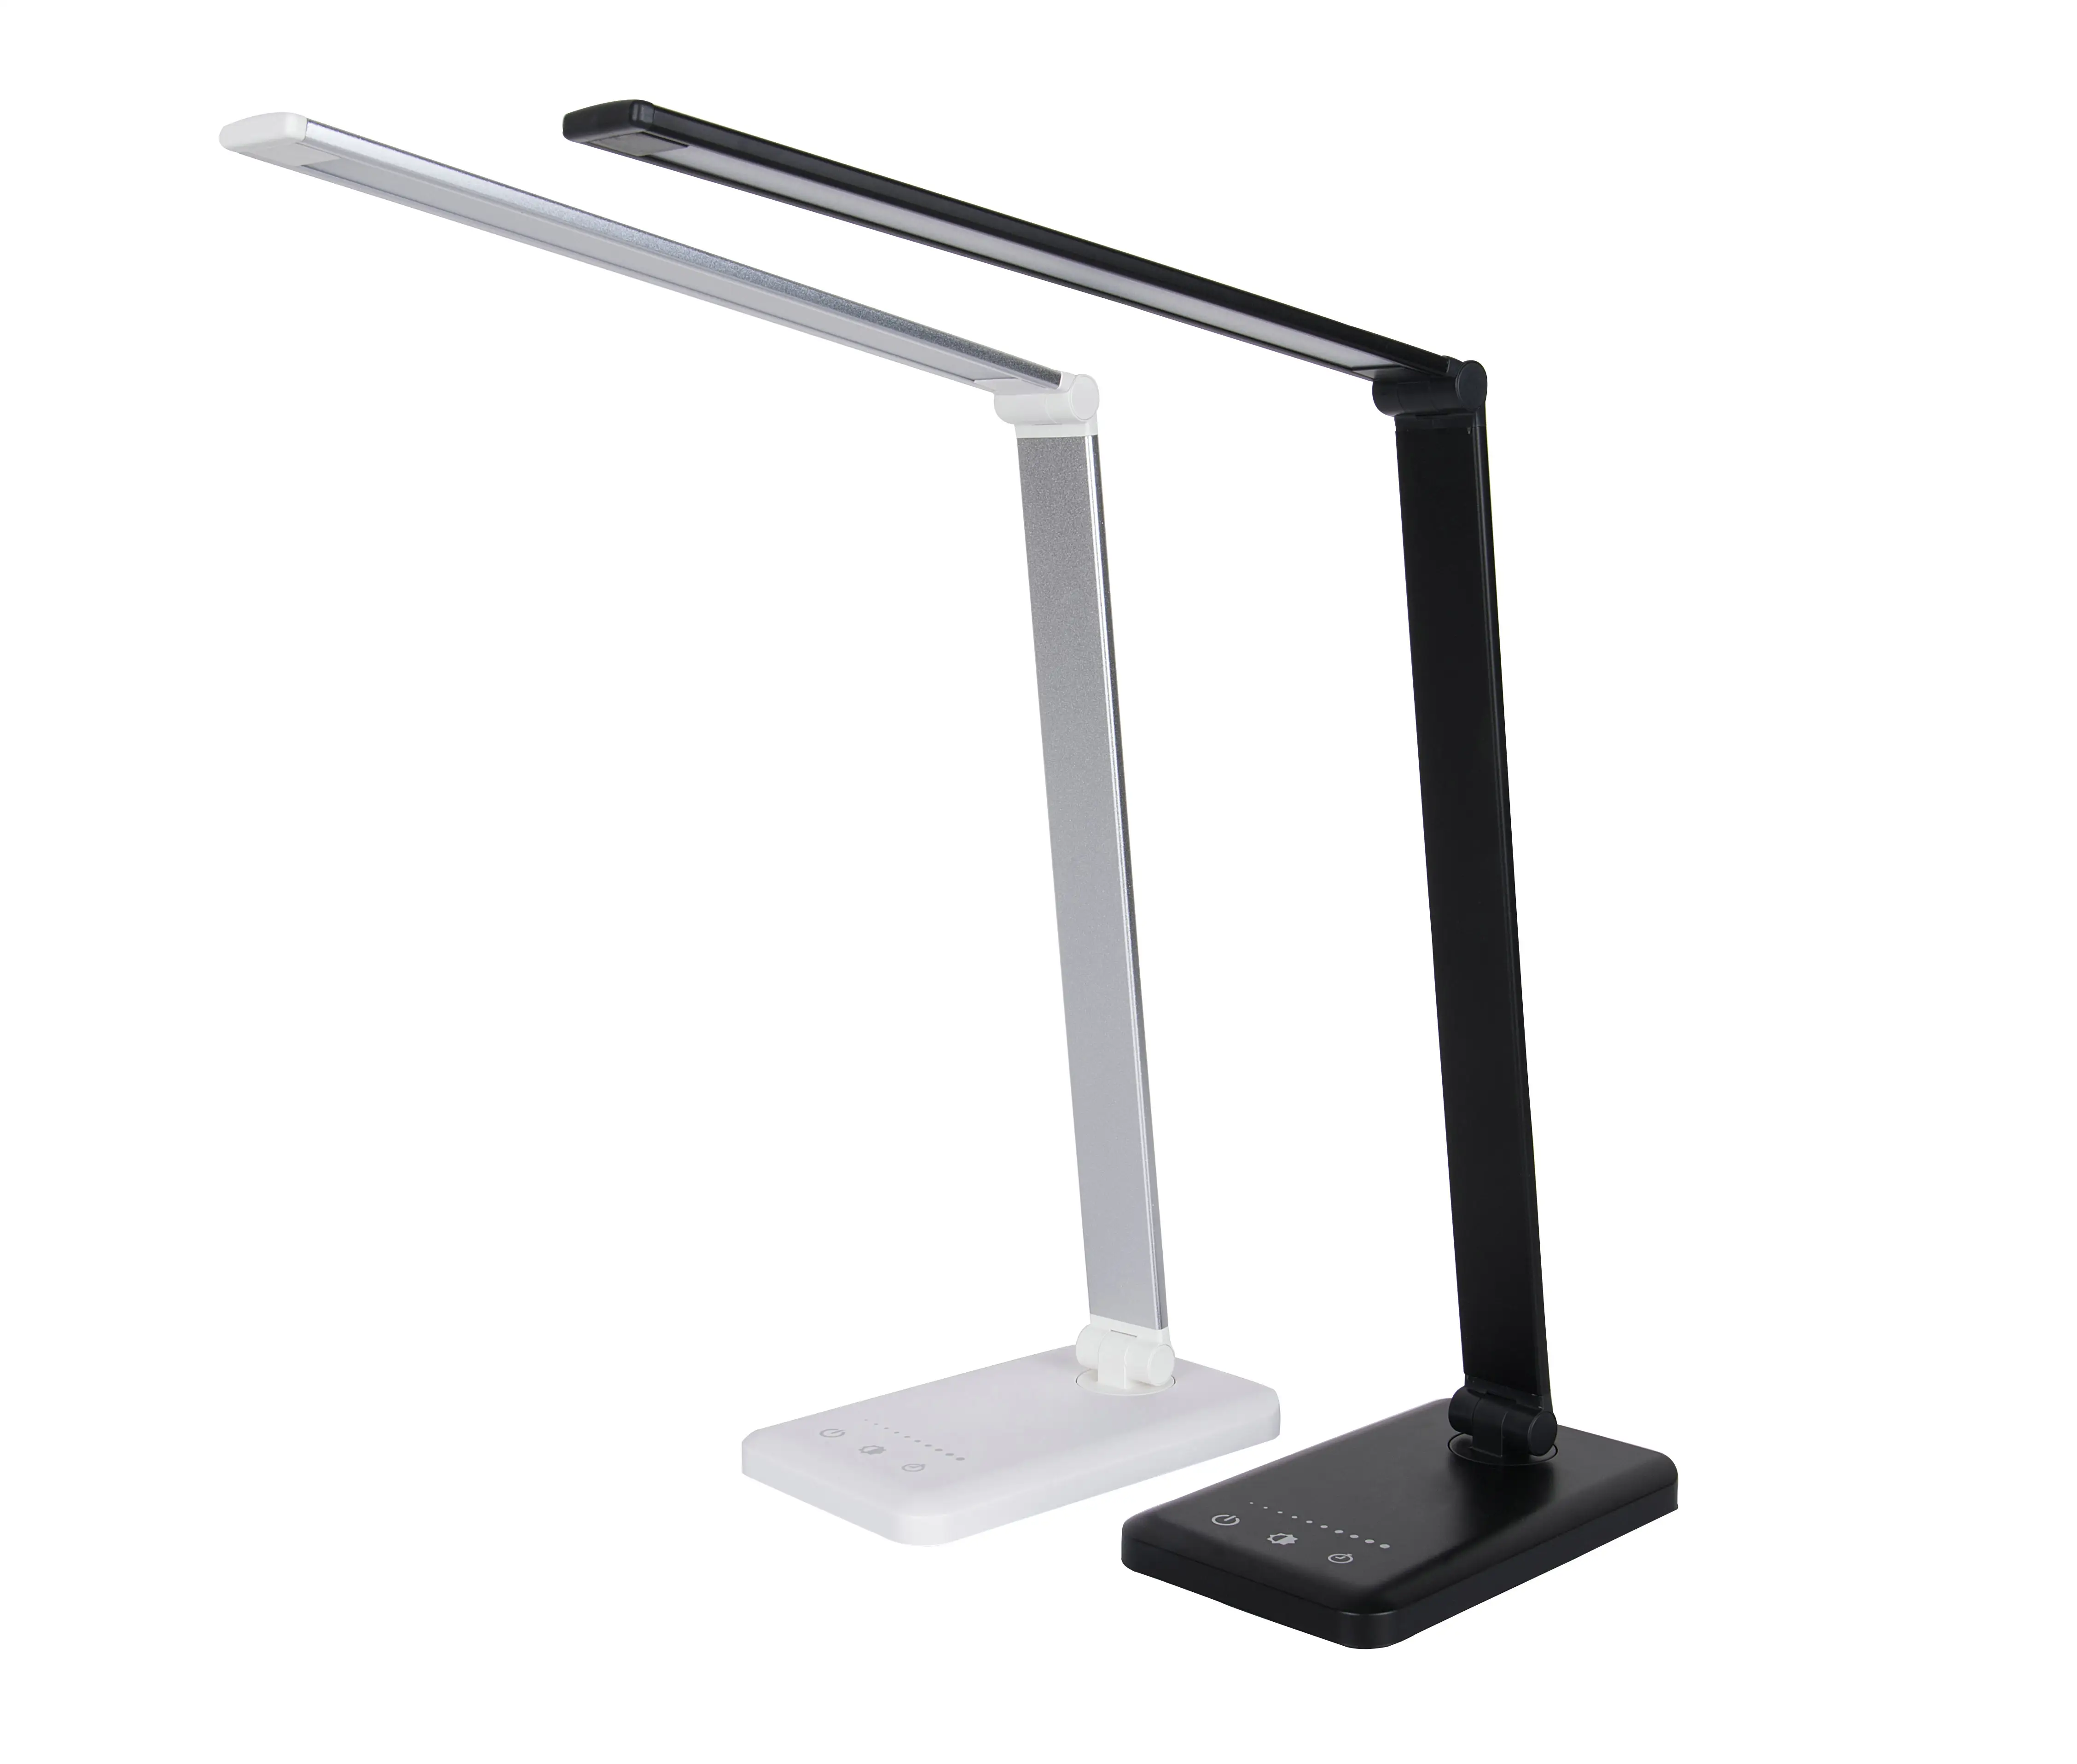 Best Seller Modern Luxury Dimmable Table Lamp Led Office Reading Study Desk Lamp With USB Charging Port